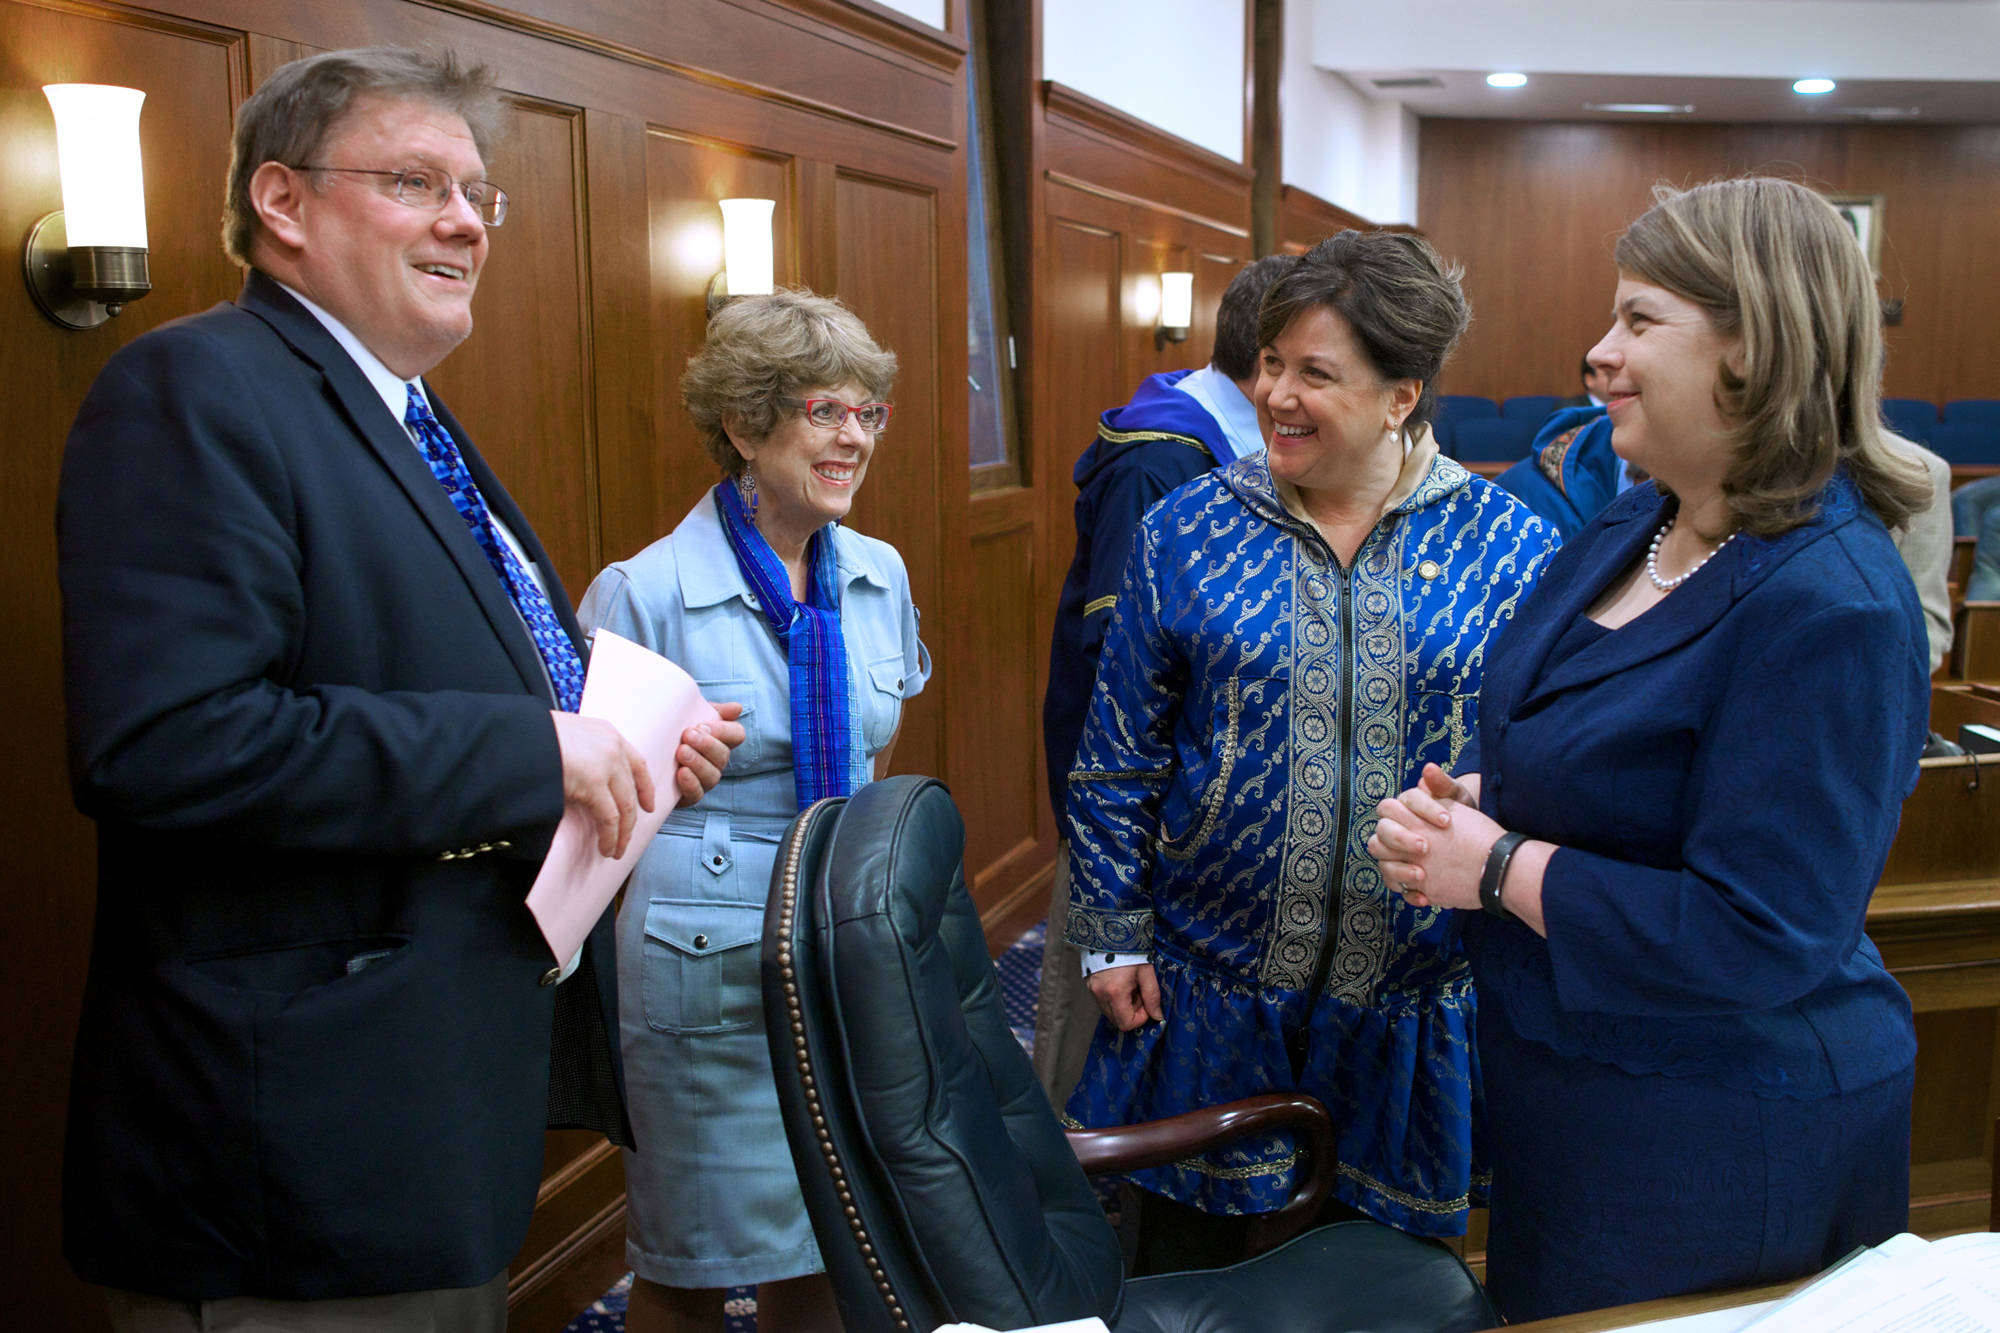 In this April 2014 photo, Rep. Bill Stoltze, R-Chugiak, left, speaks with Rep. Gabrielle LeDoux, R-Anchorage, Rep. Lynn Gattis, R-Wasilla, and Rep. Tammie Wilson, R-North Pole, in the House Chambers. (Michael Penn | Juneau Empire File)